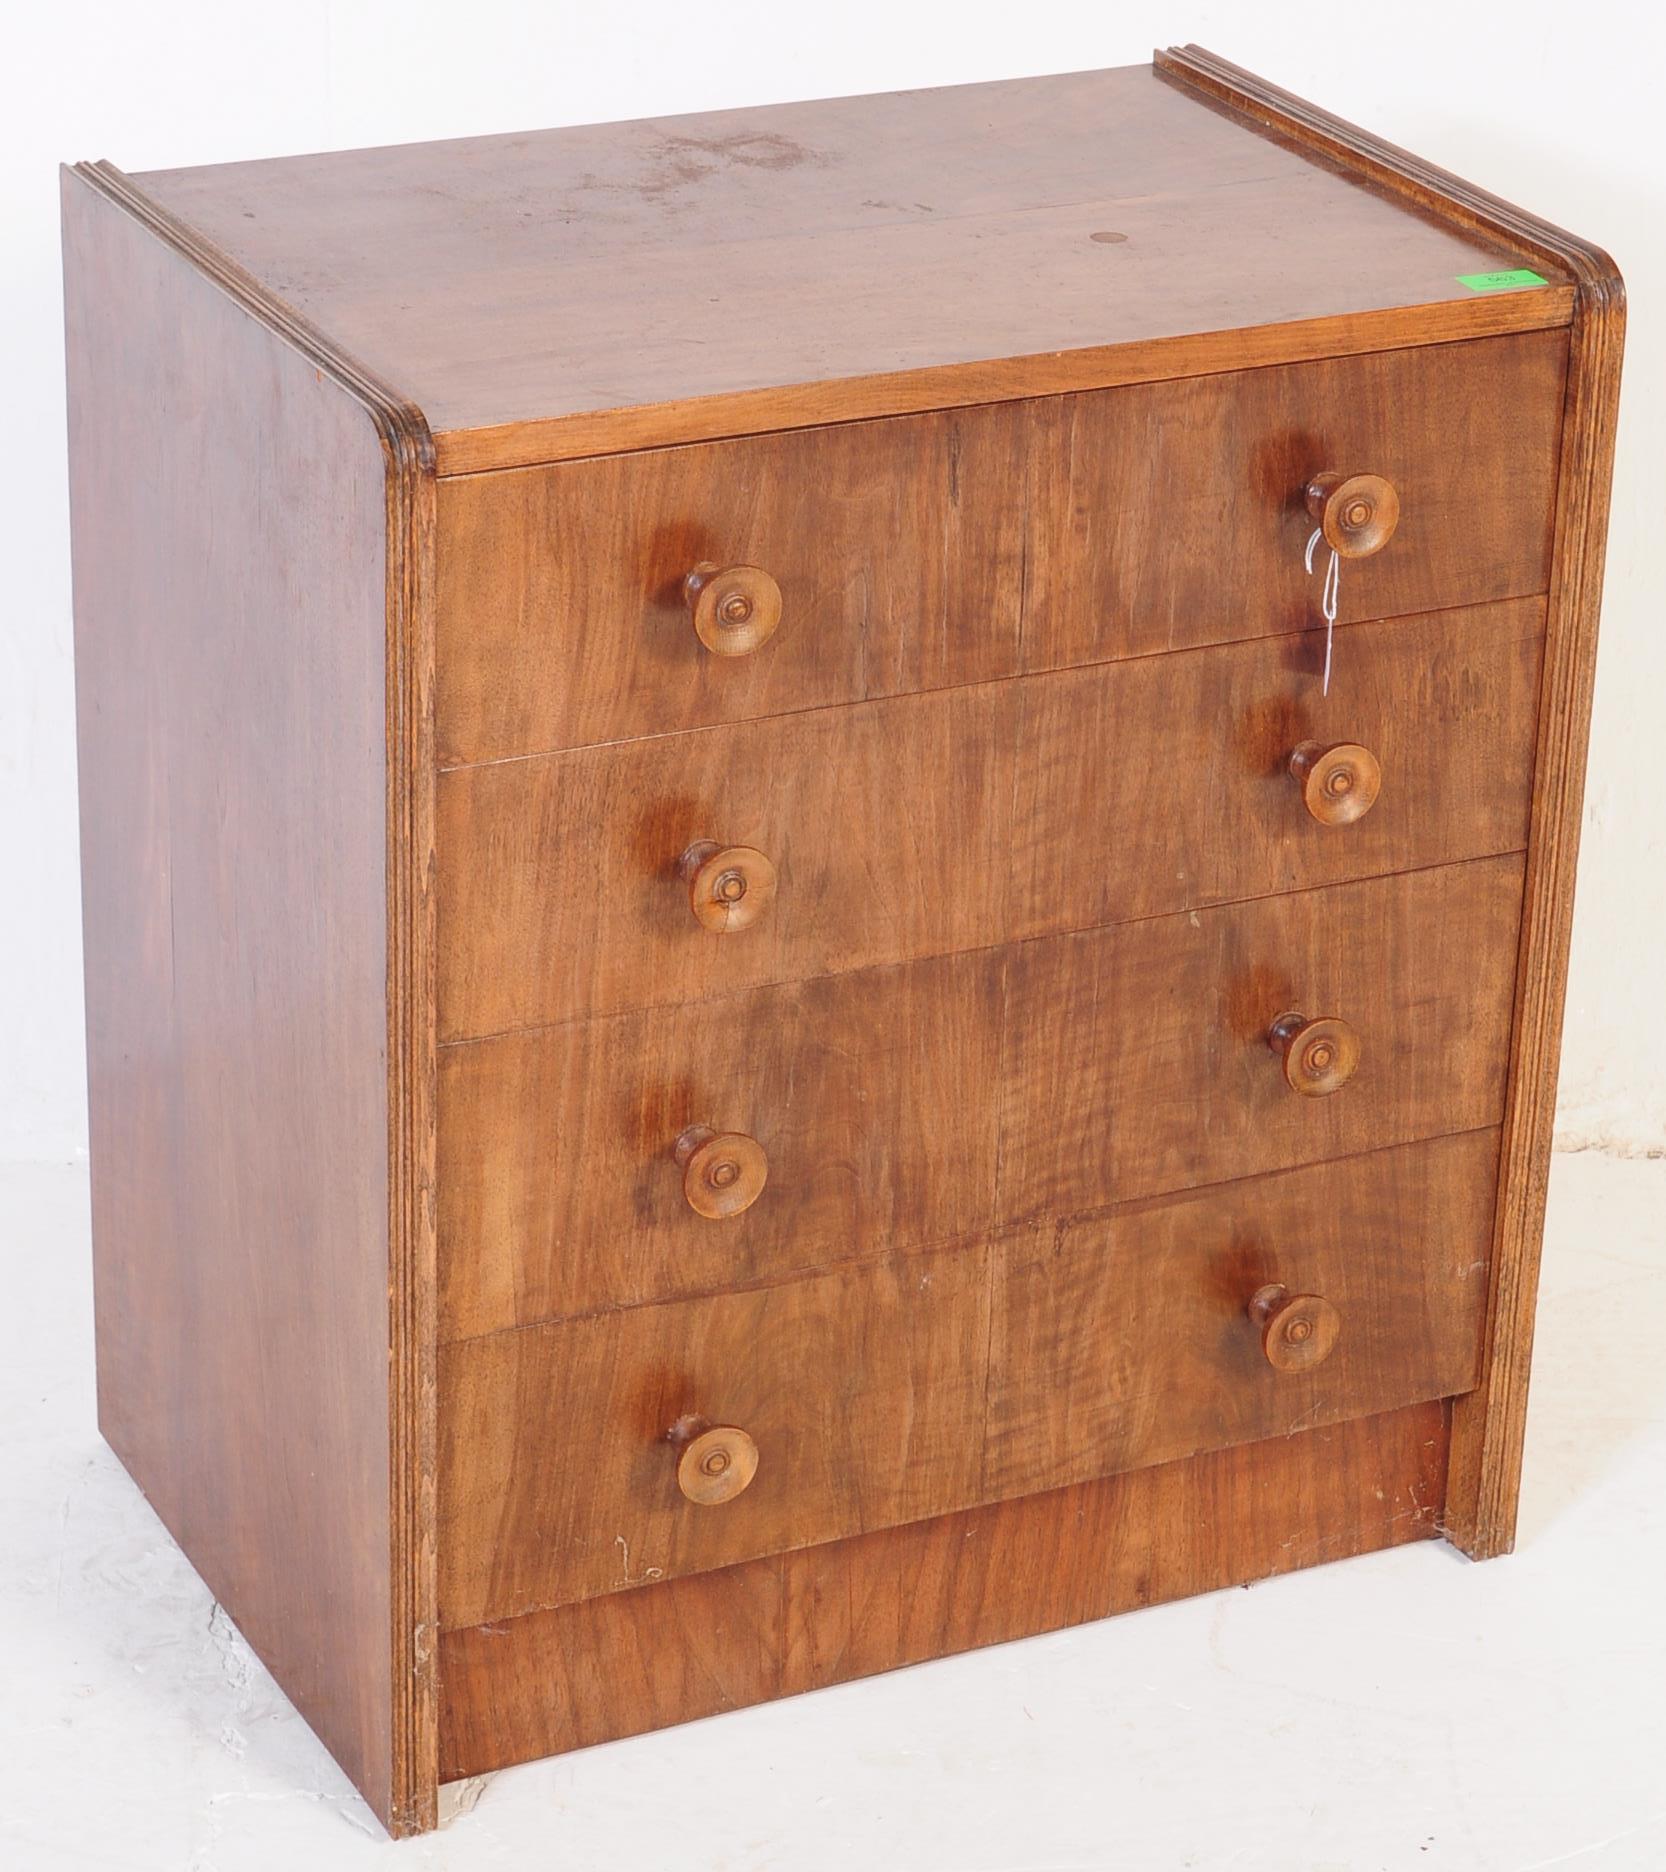 1930S ART DECO BACHELORS CHEST OF DRAWERS - Image 2 of 6